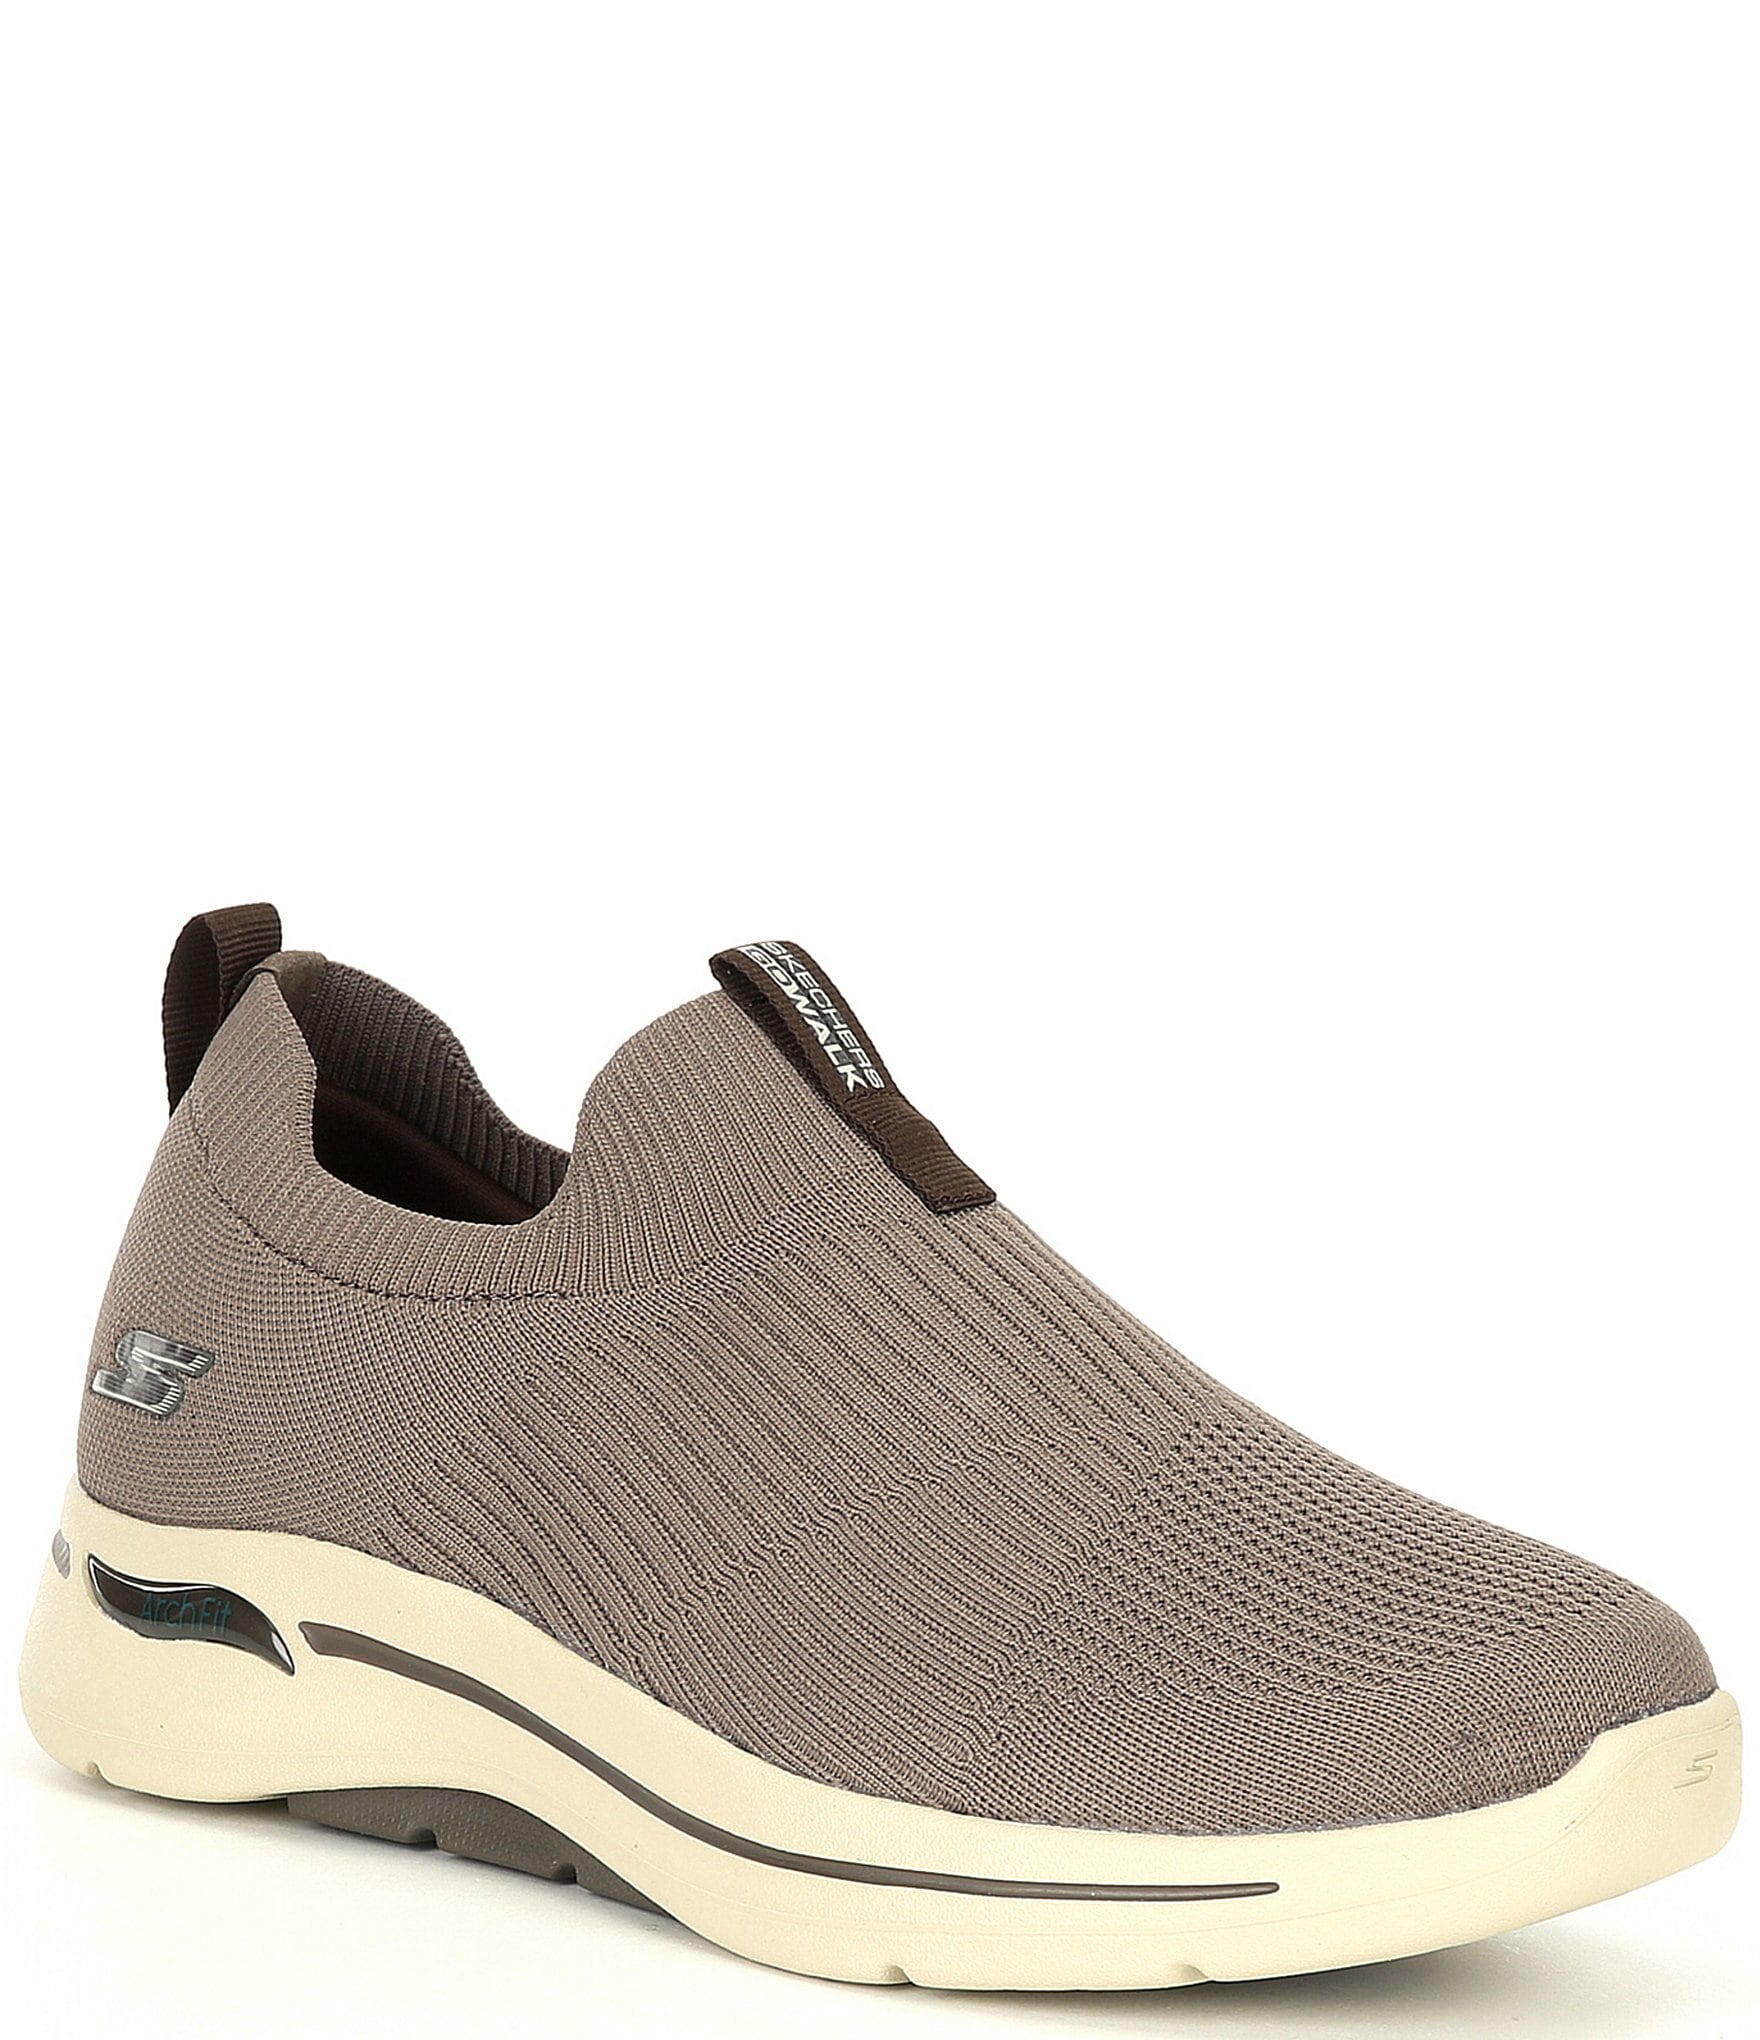 GOwalk Arch Fit Iconic Slip-On Sneakers 